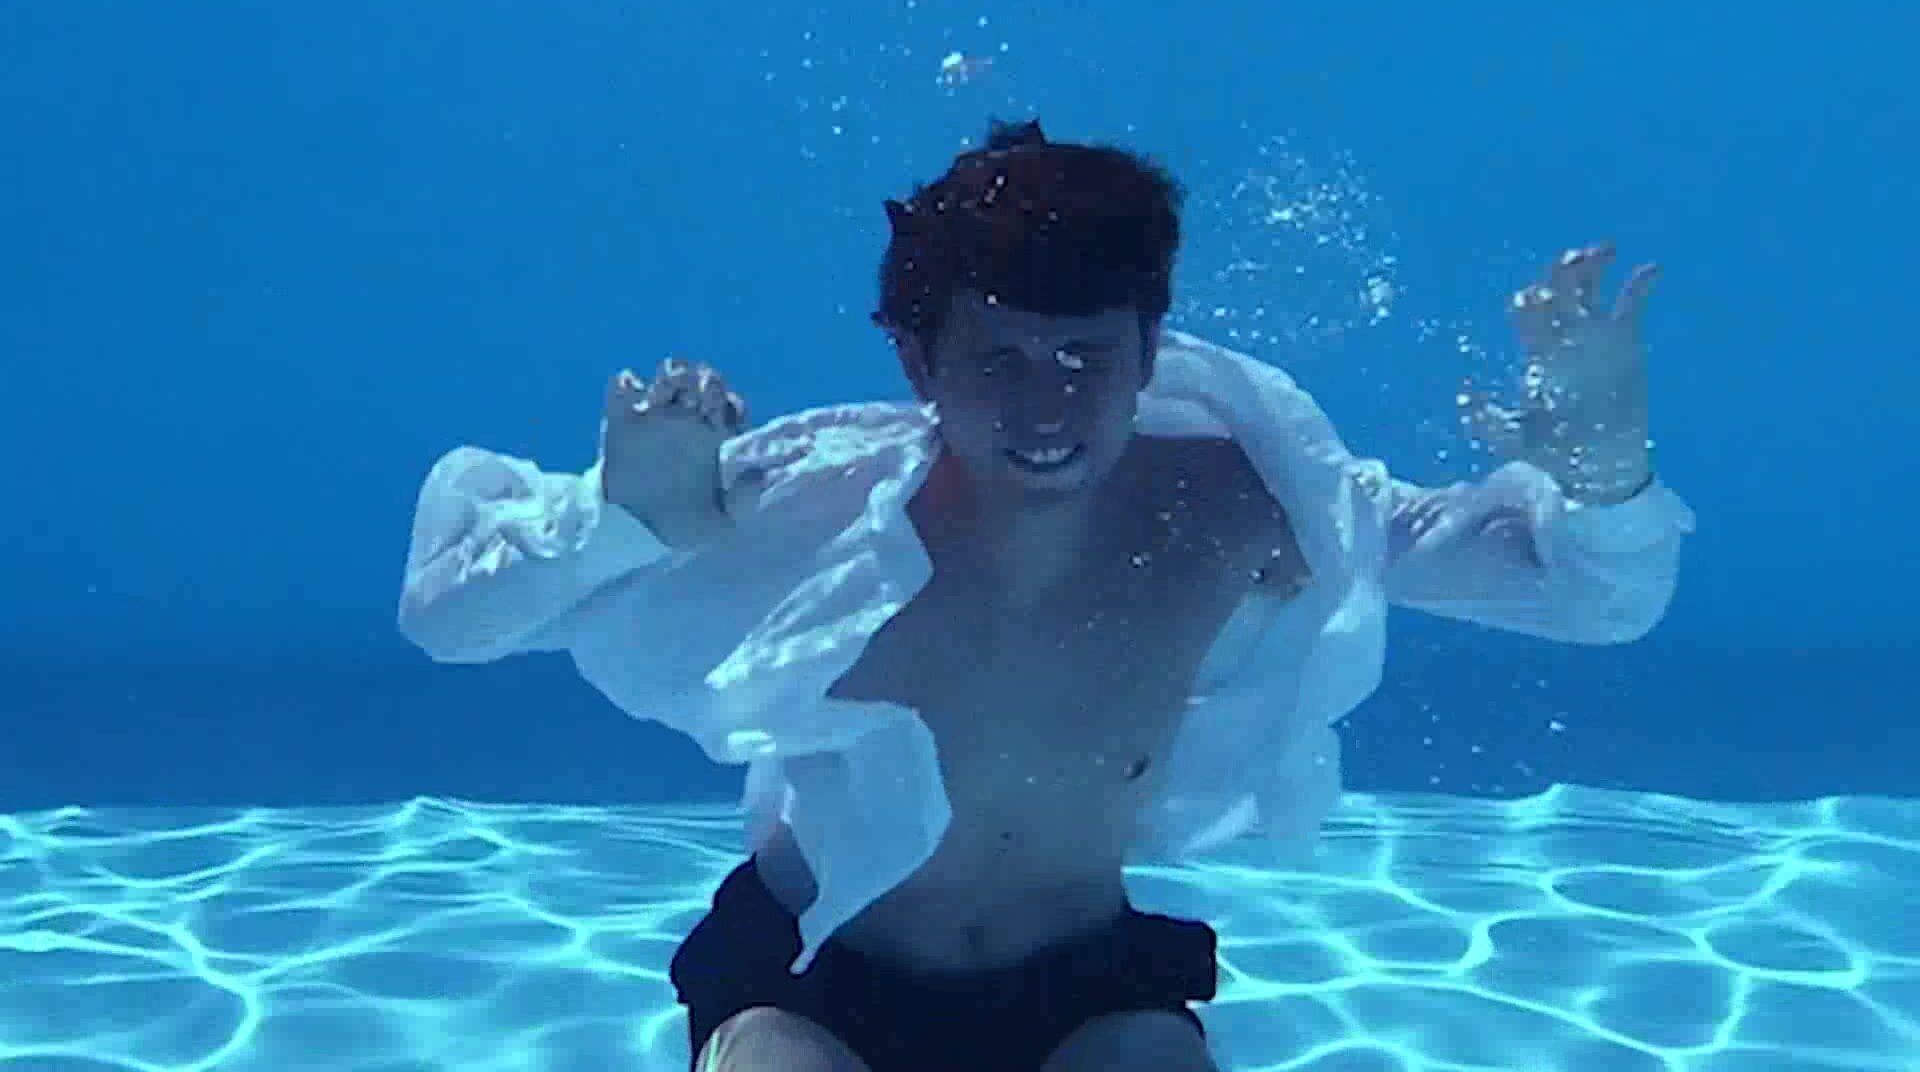 Barefaced clothed guy posing underwater